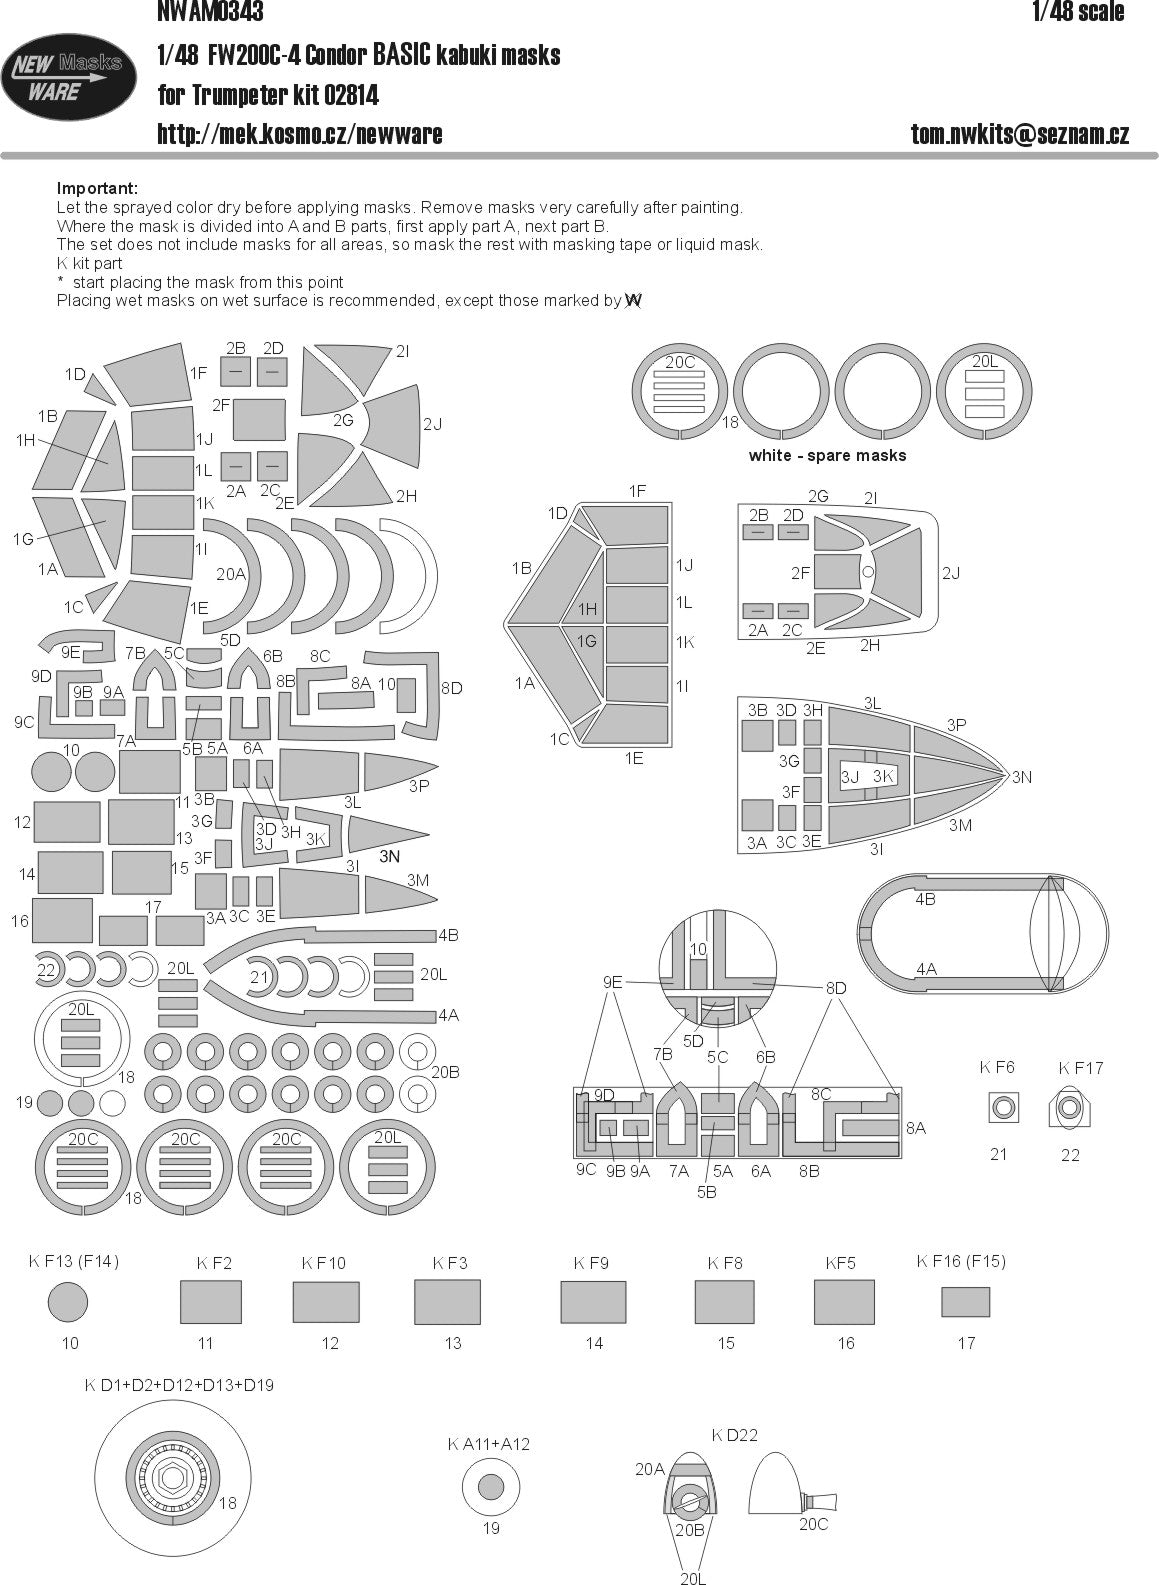 New Ware 0343 - Masking set for Trumpeter 1/48 FW-200C-4 Condor BASIC